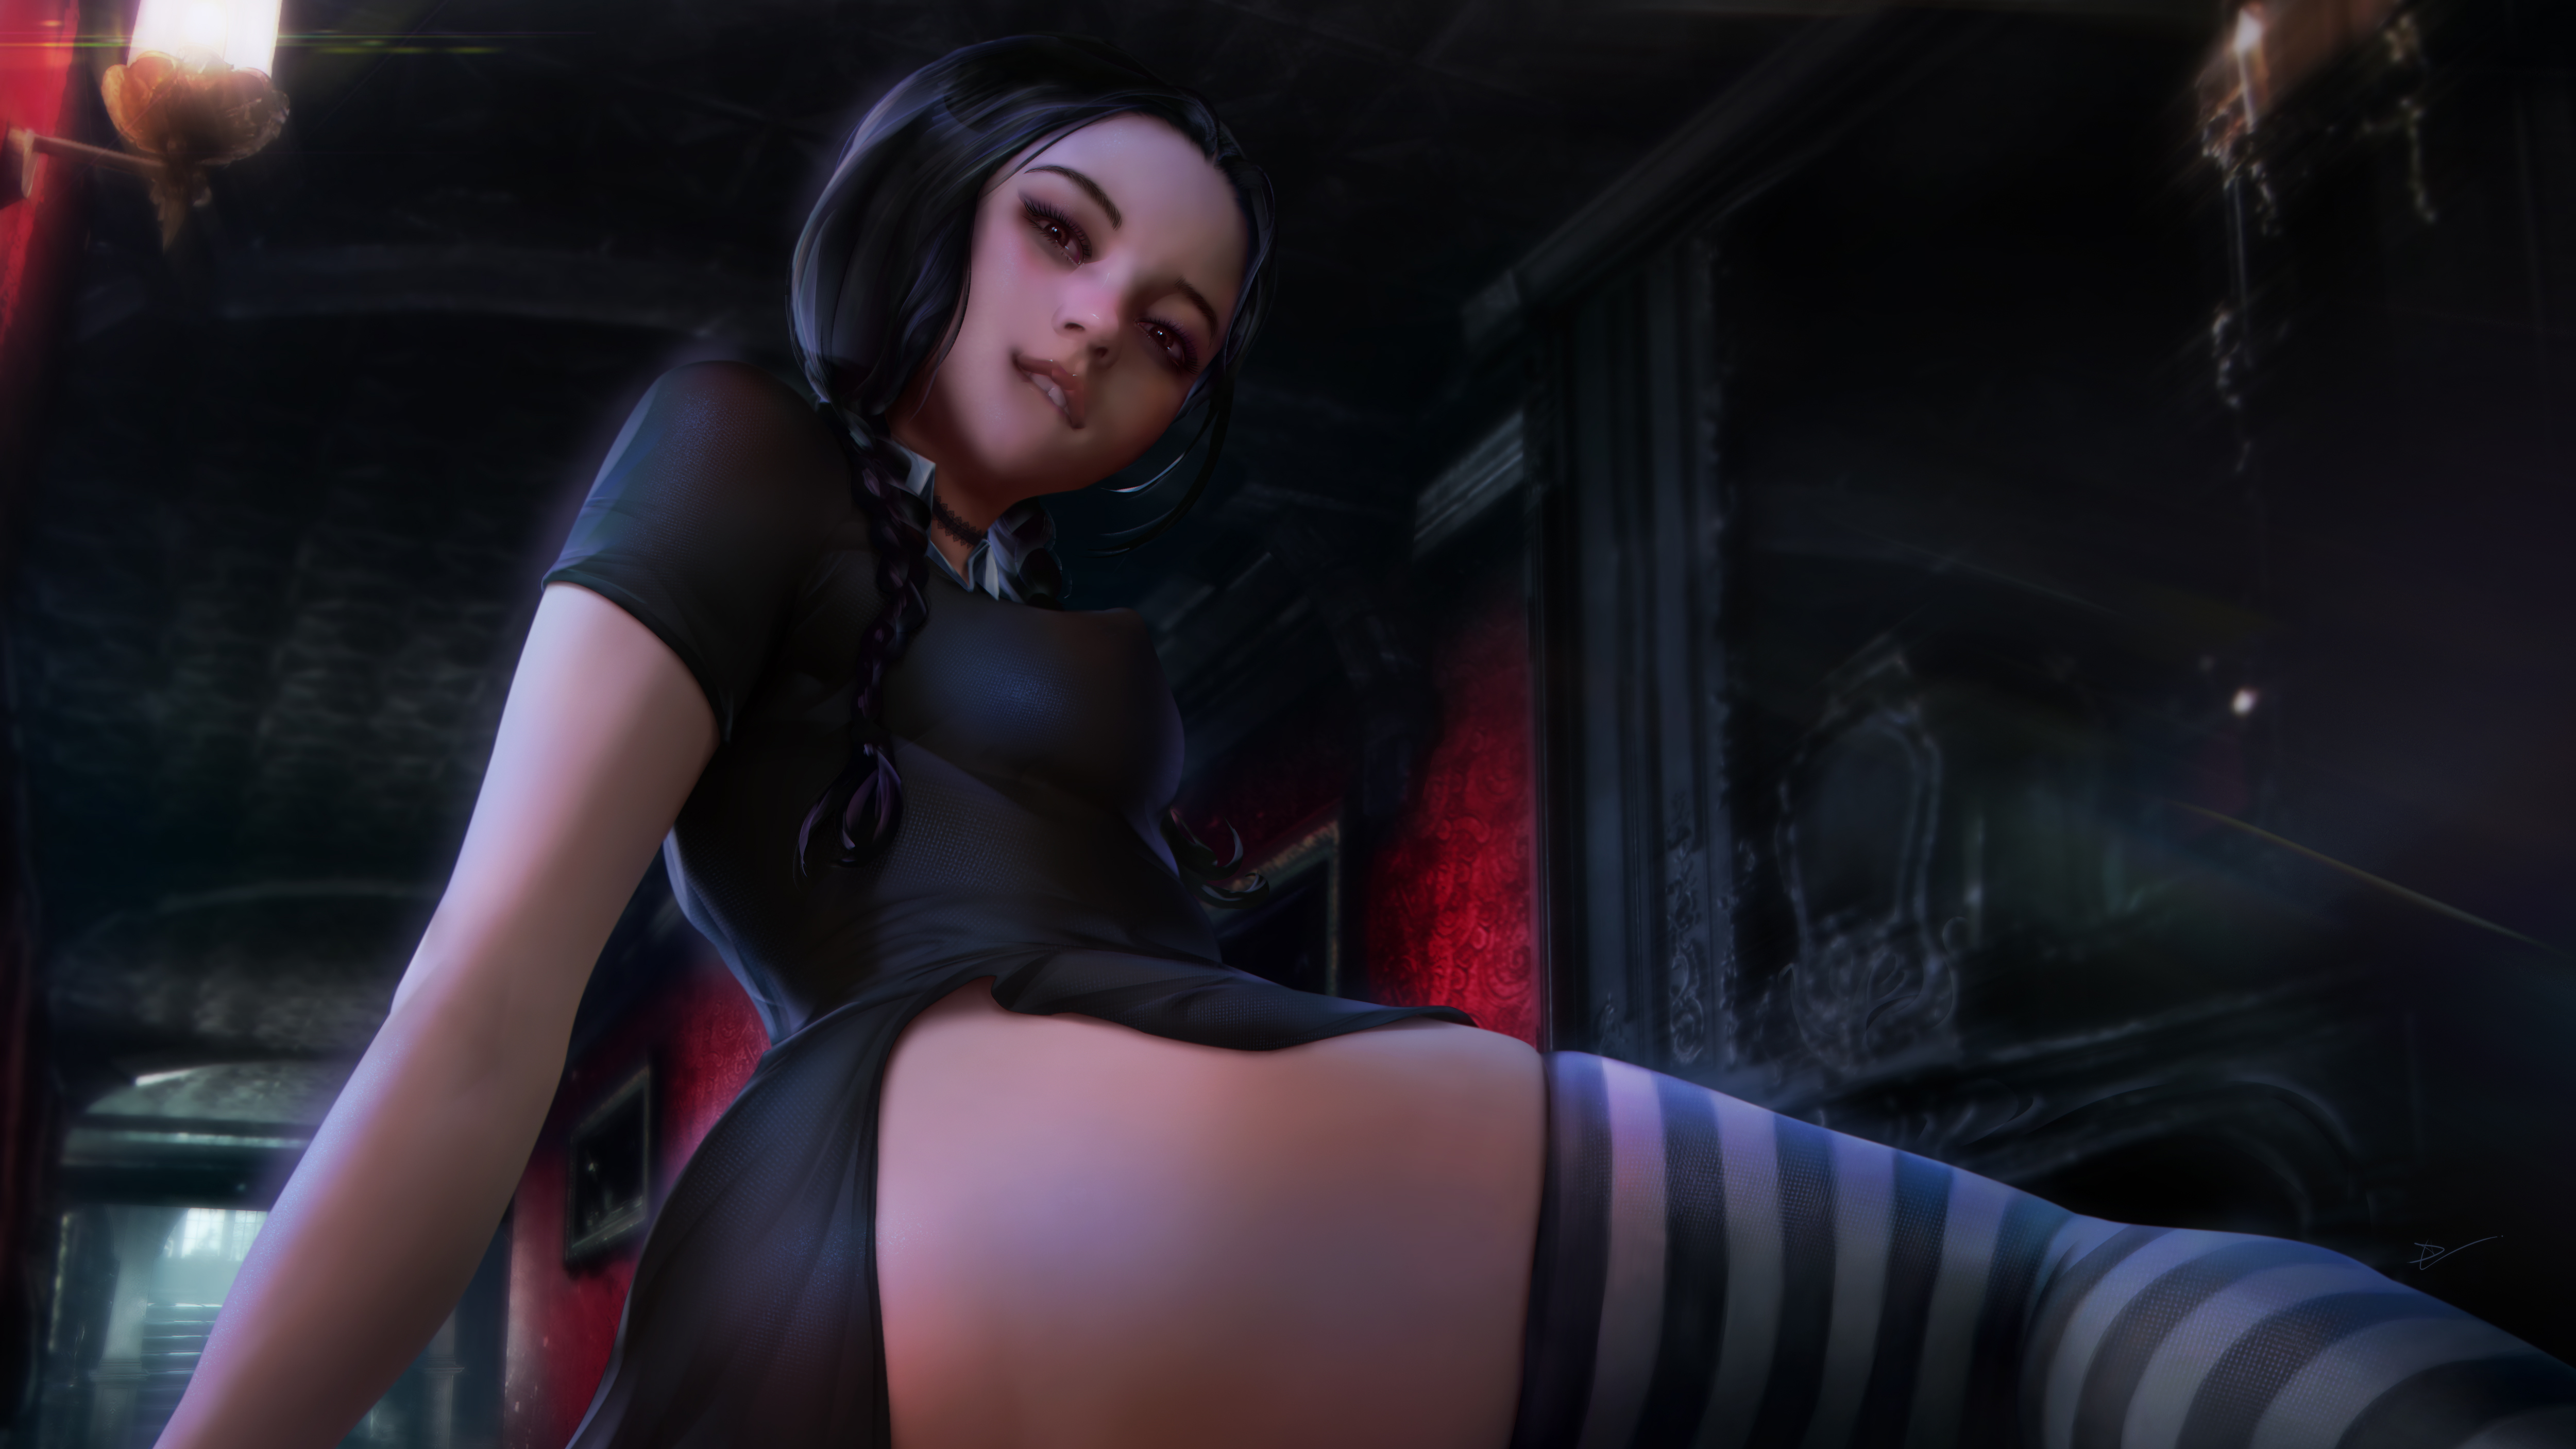 General 5000x2813 Wednesday Addams The Addams Family movies fictional character black hair twintails braids black dress dress thighs thigh-highs looking at viewer POV biting lips artwork drawing fan art DemonLordDante digital art